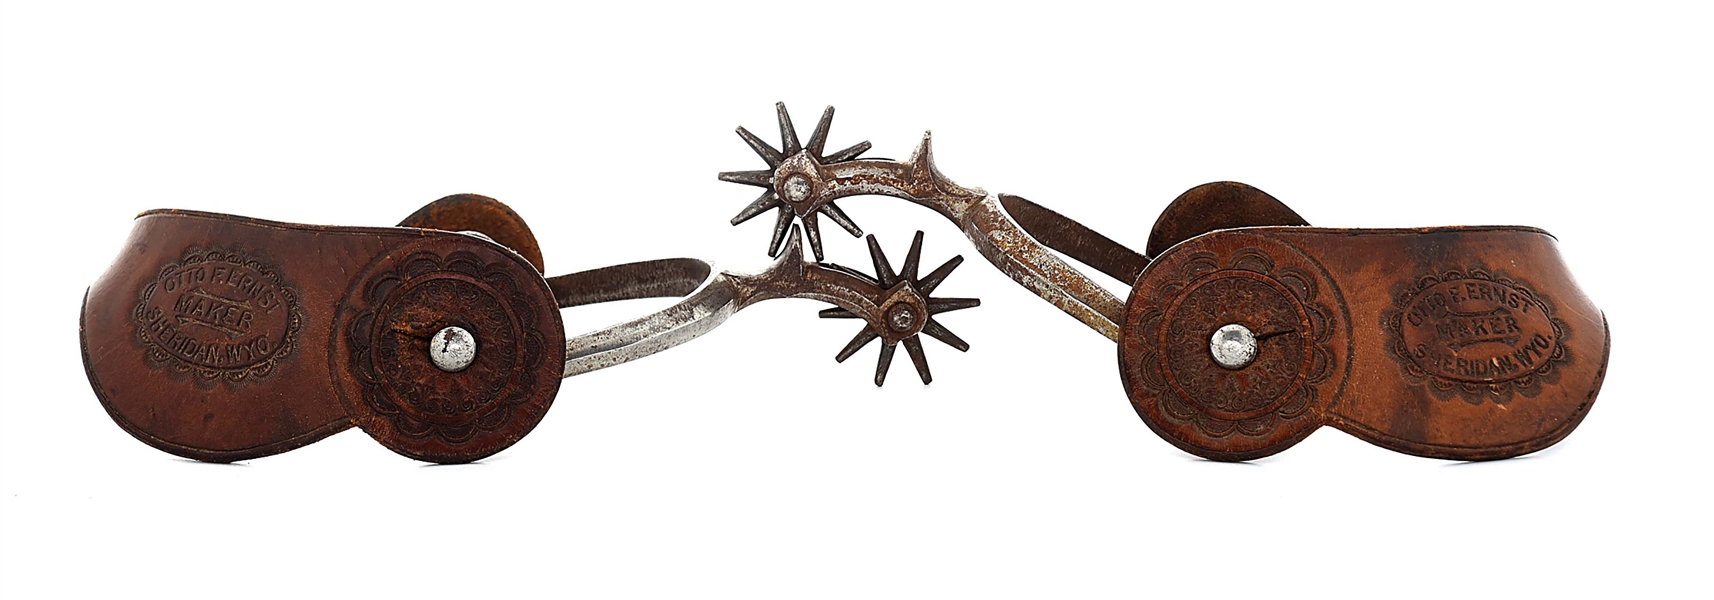 UNMARKED SPURS WITH OTTO ERNST STRAPS